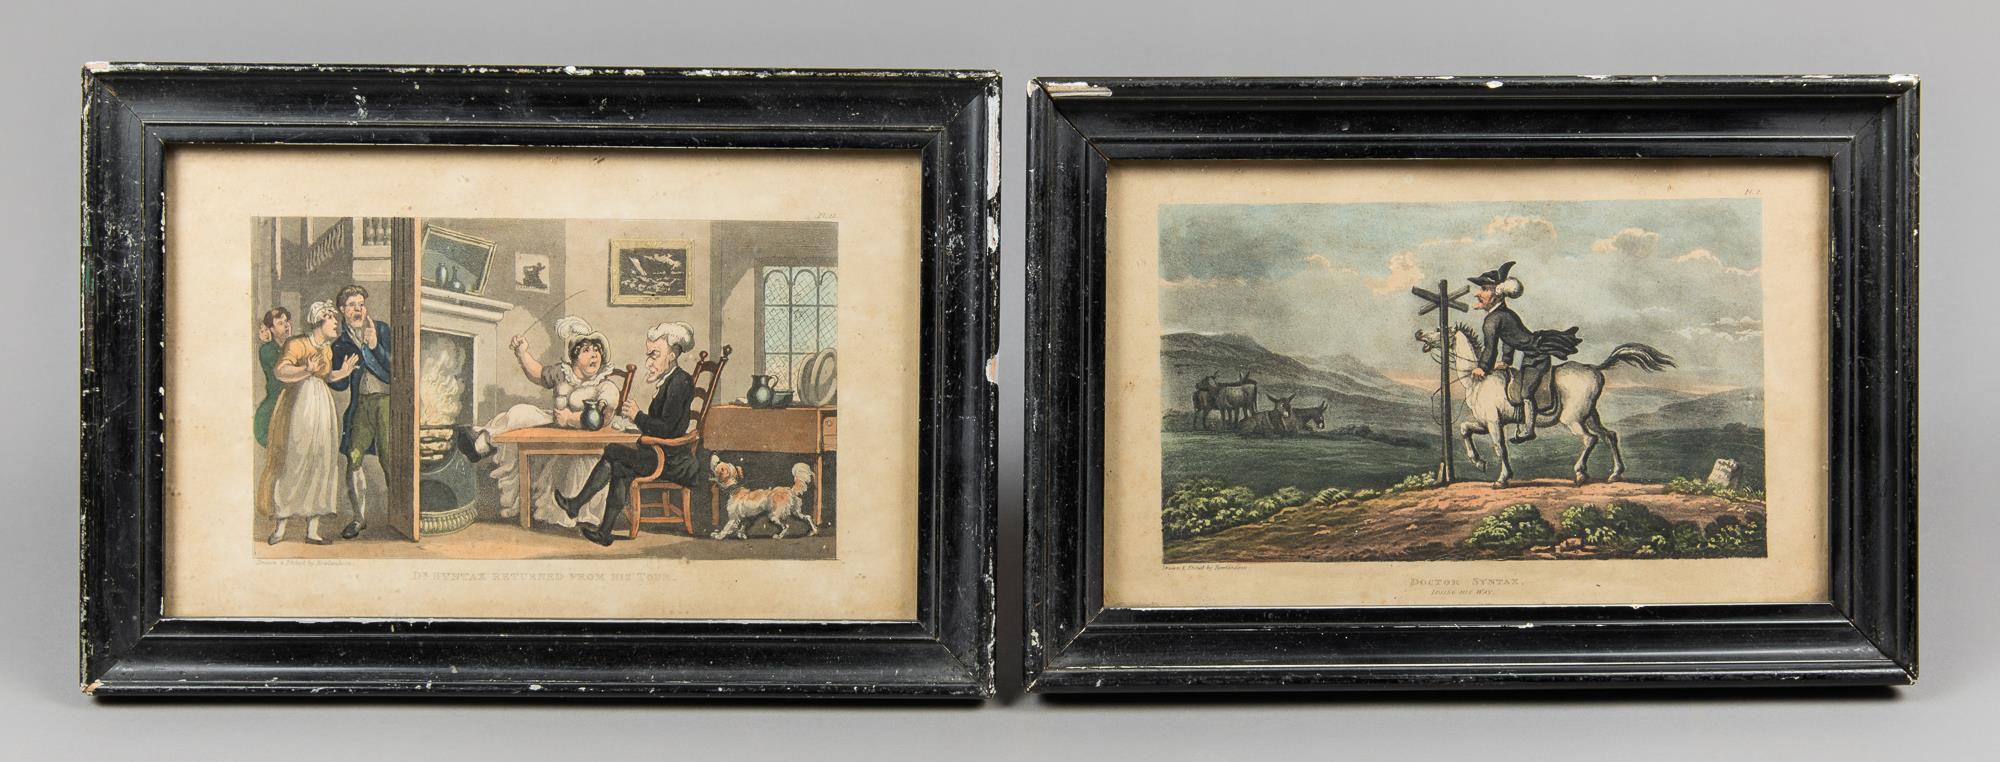 THOMAS ROWLANDSON, TWO 19TH CENTURY COLOURED ETCHINGS, FRAMED AND GLAZED. (h 20cm x w 29cm) ‘